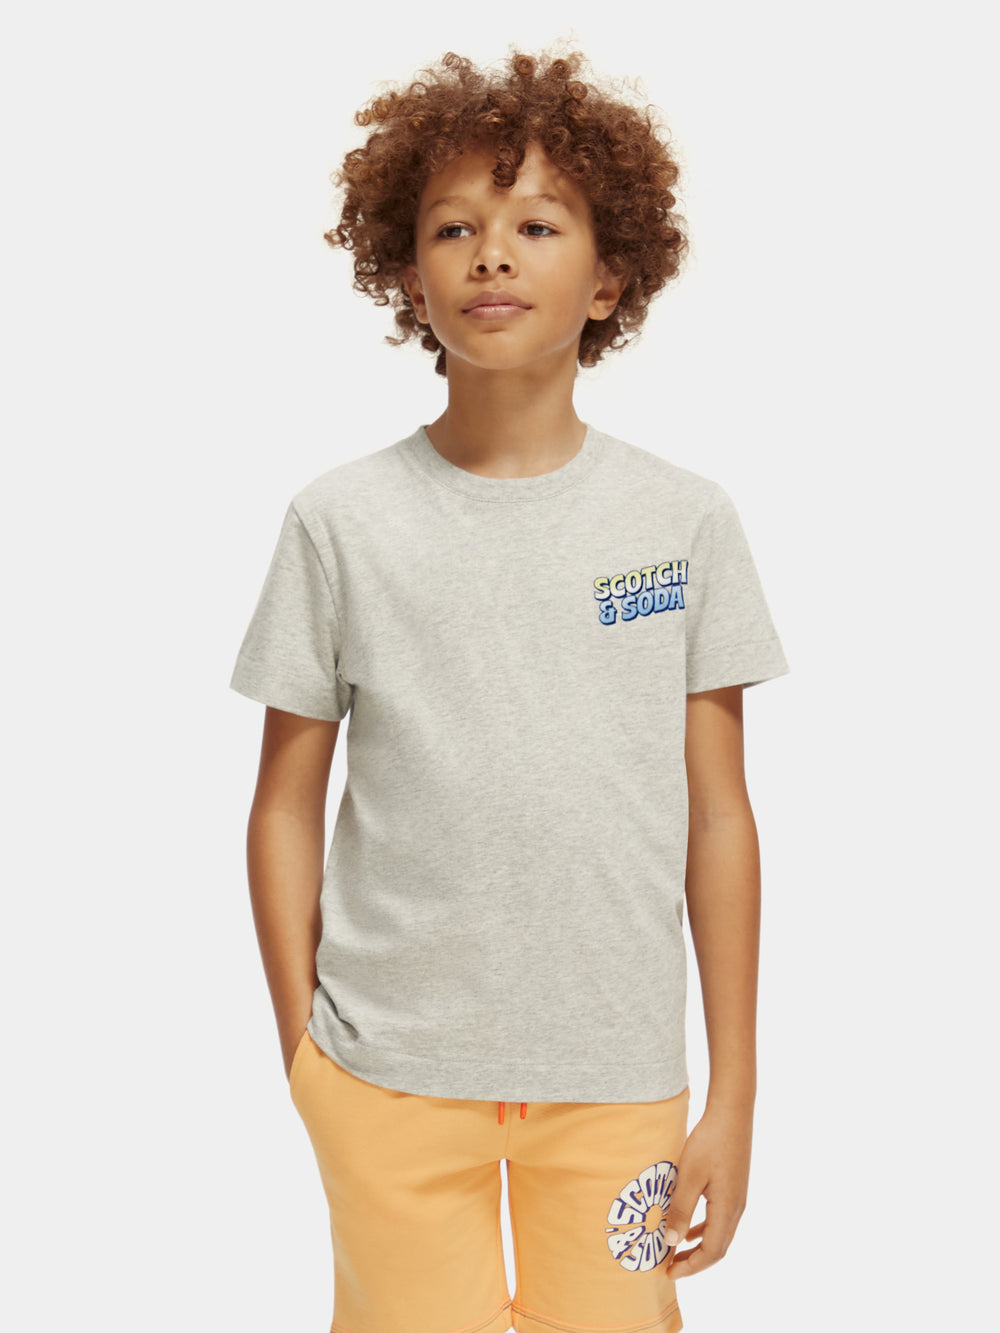 Relaxed fit graphic t-shirt - Scotch & Soda AU